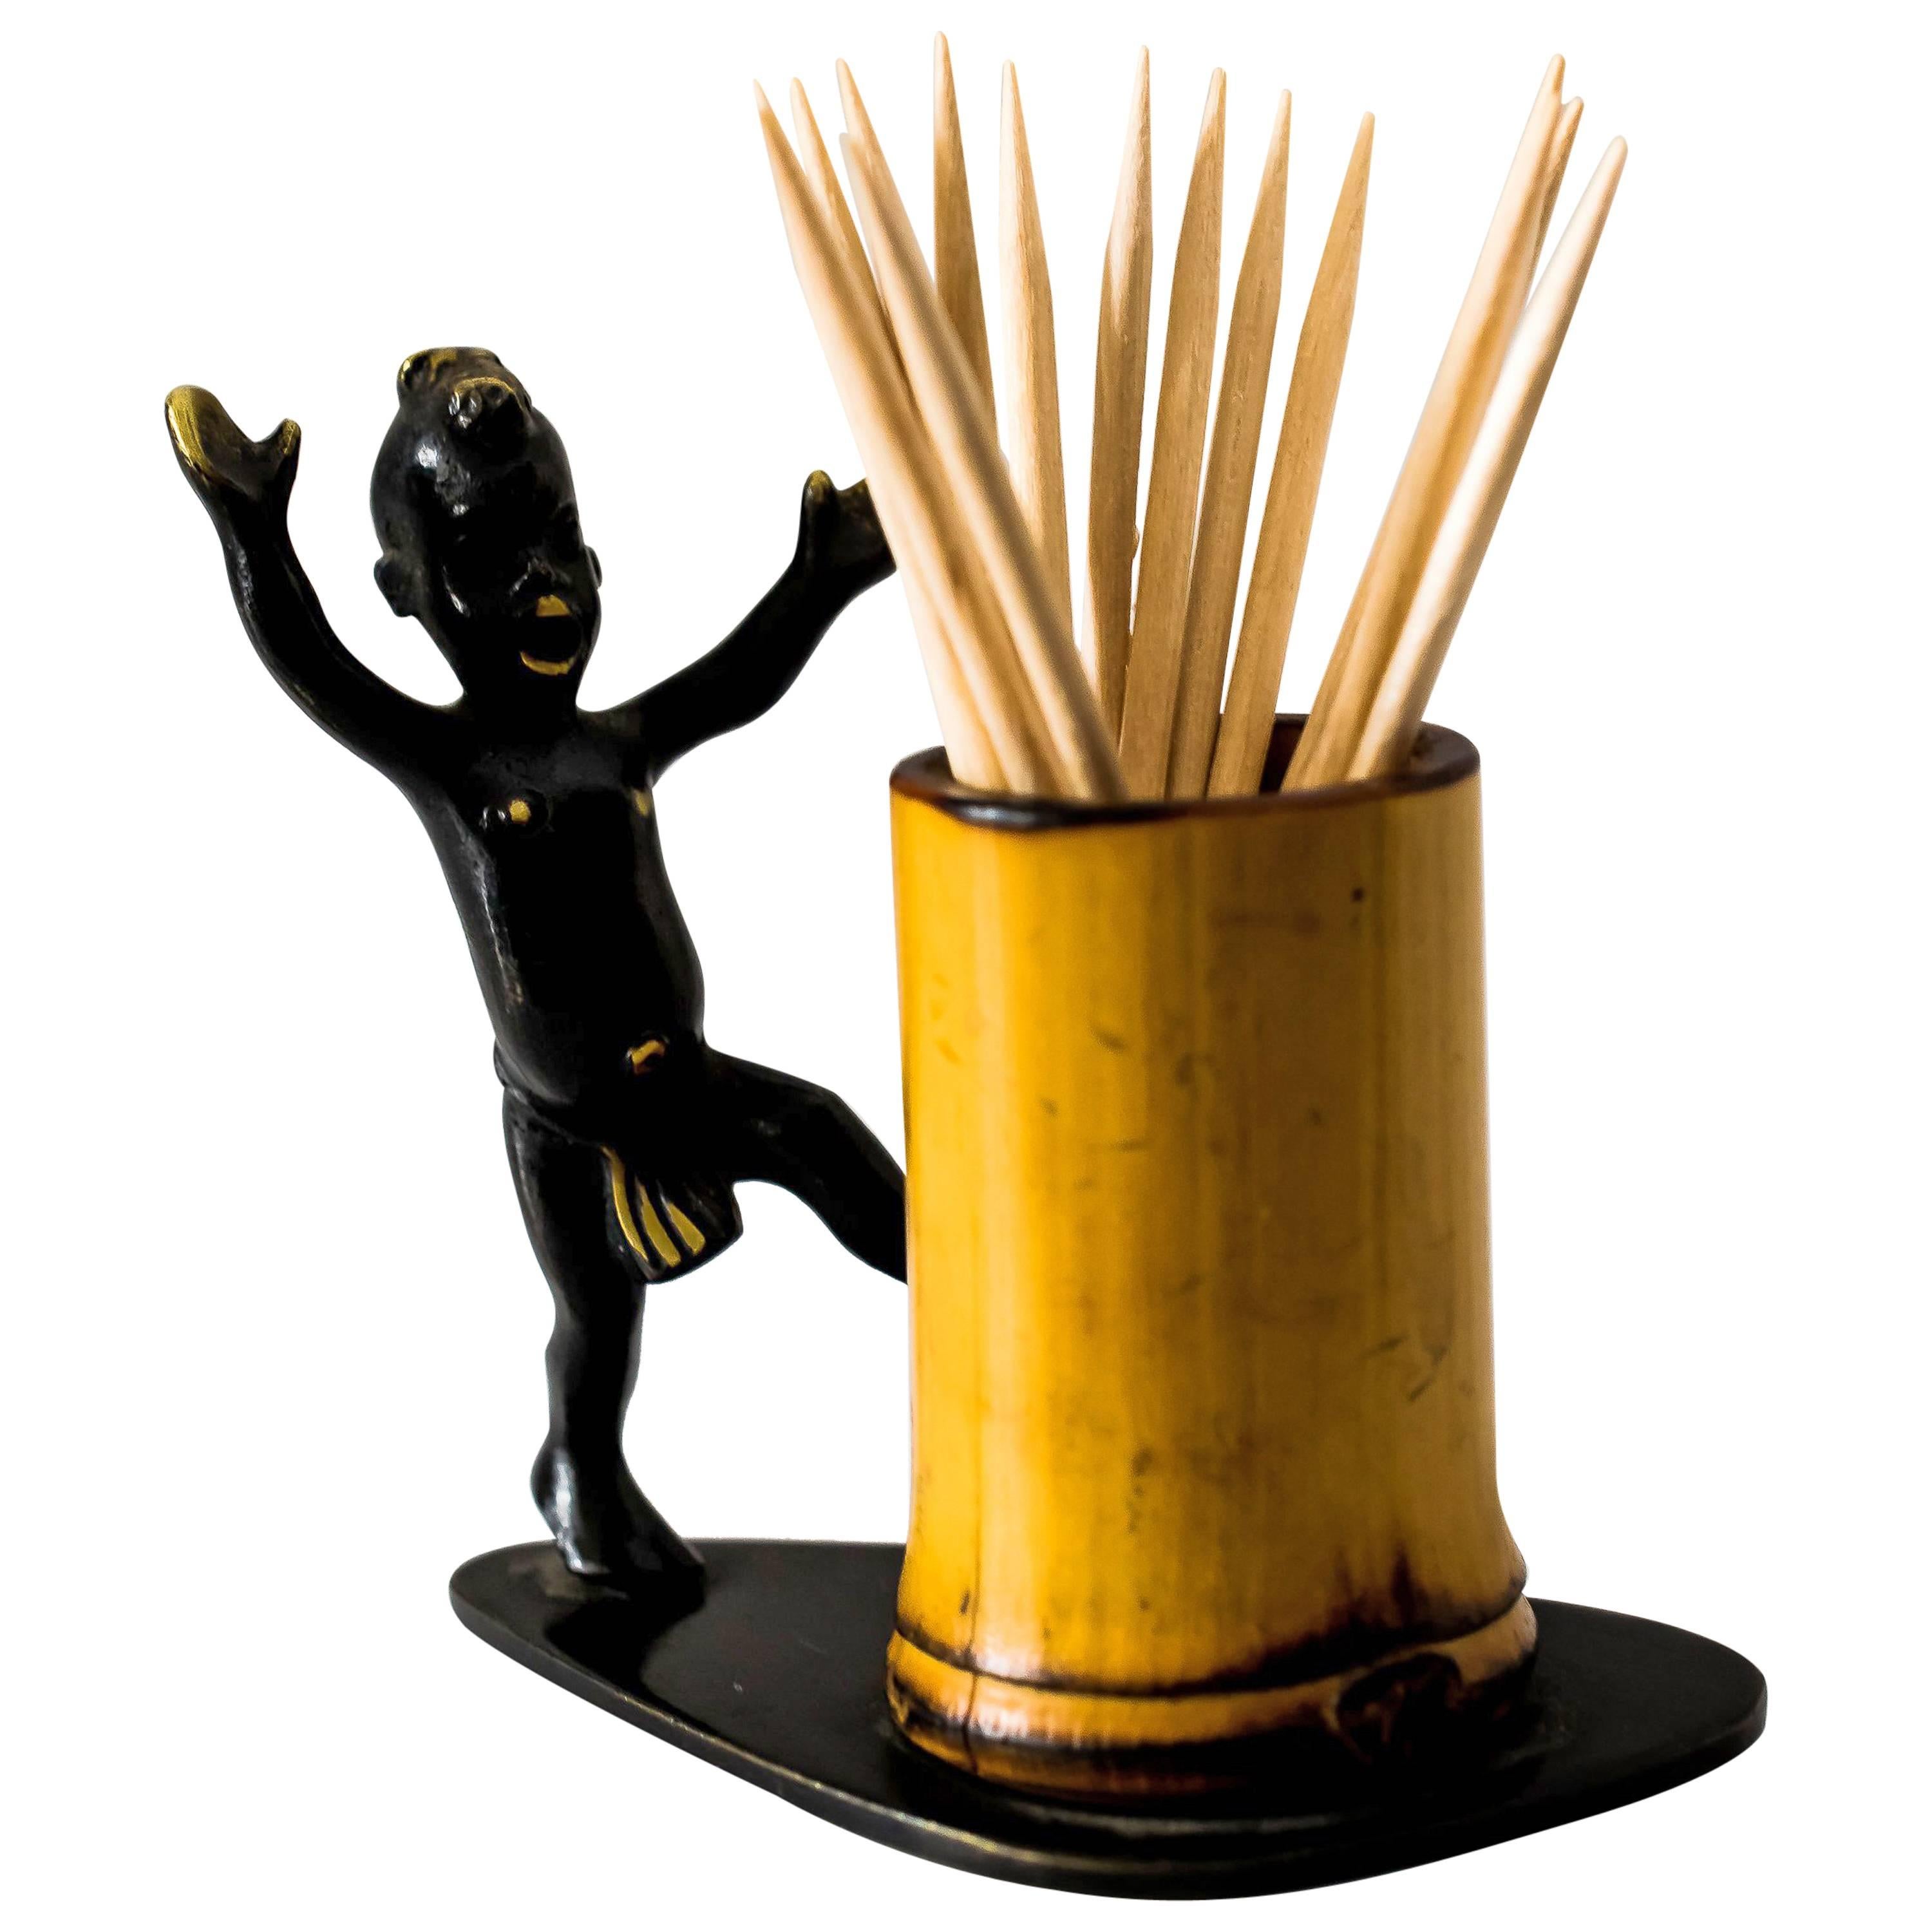 Toothpick Holder with African Boy by Richard Rohac